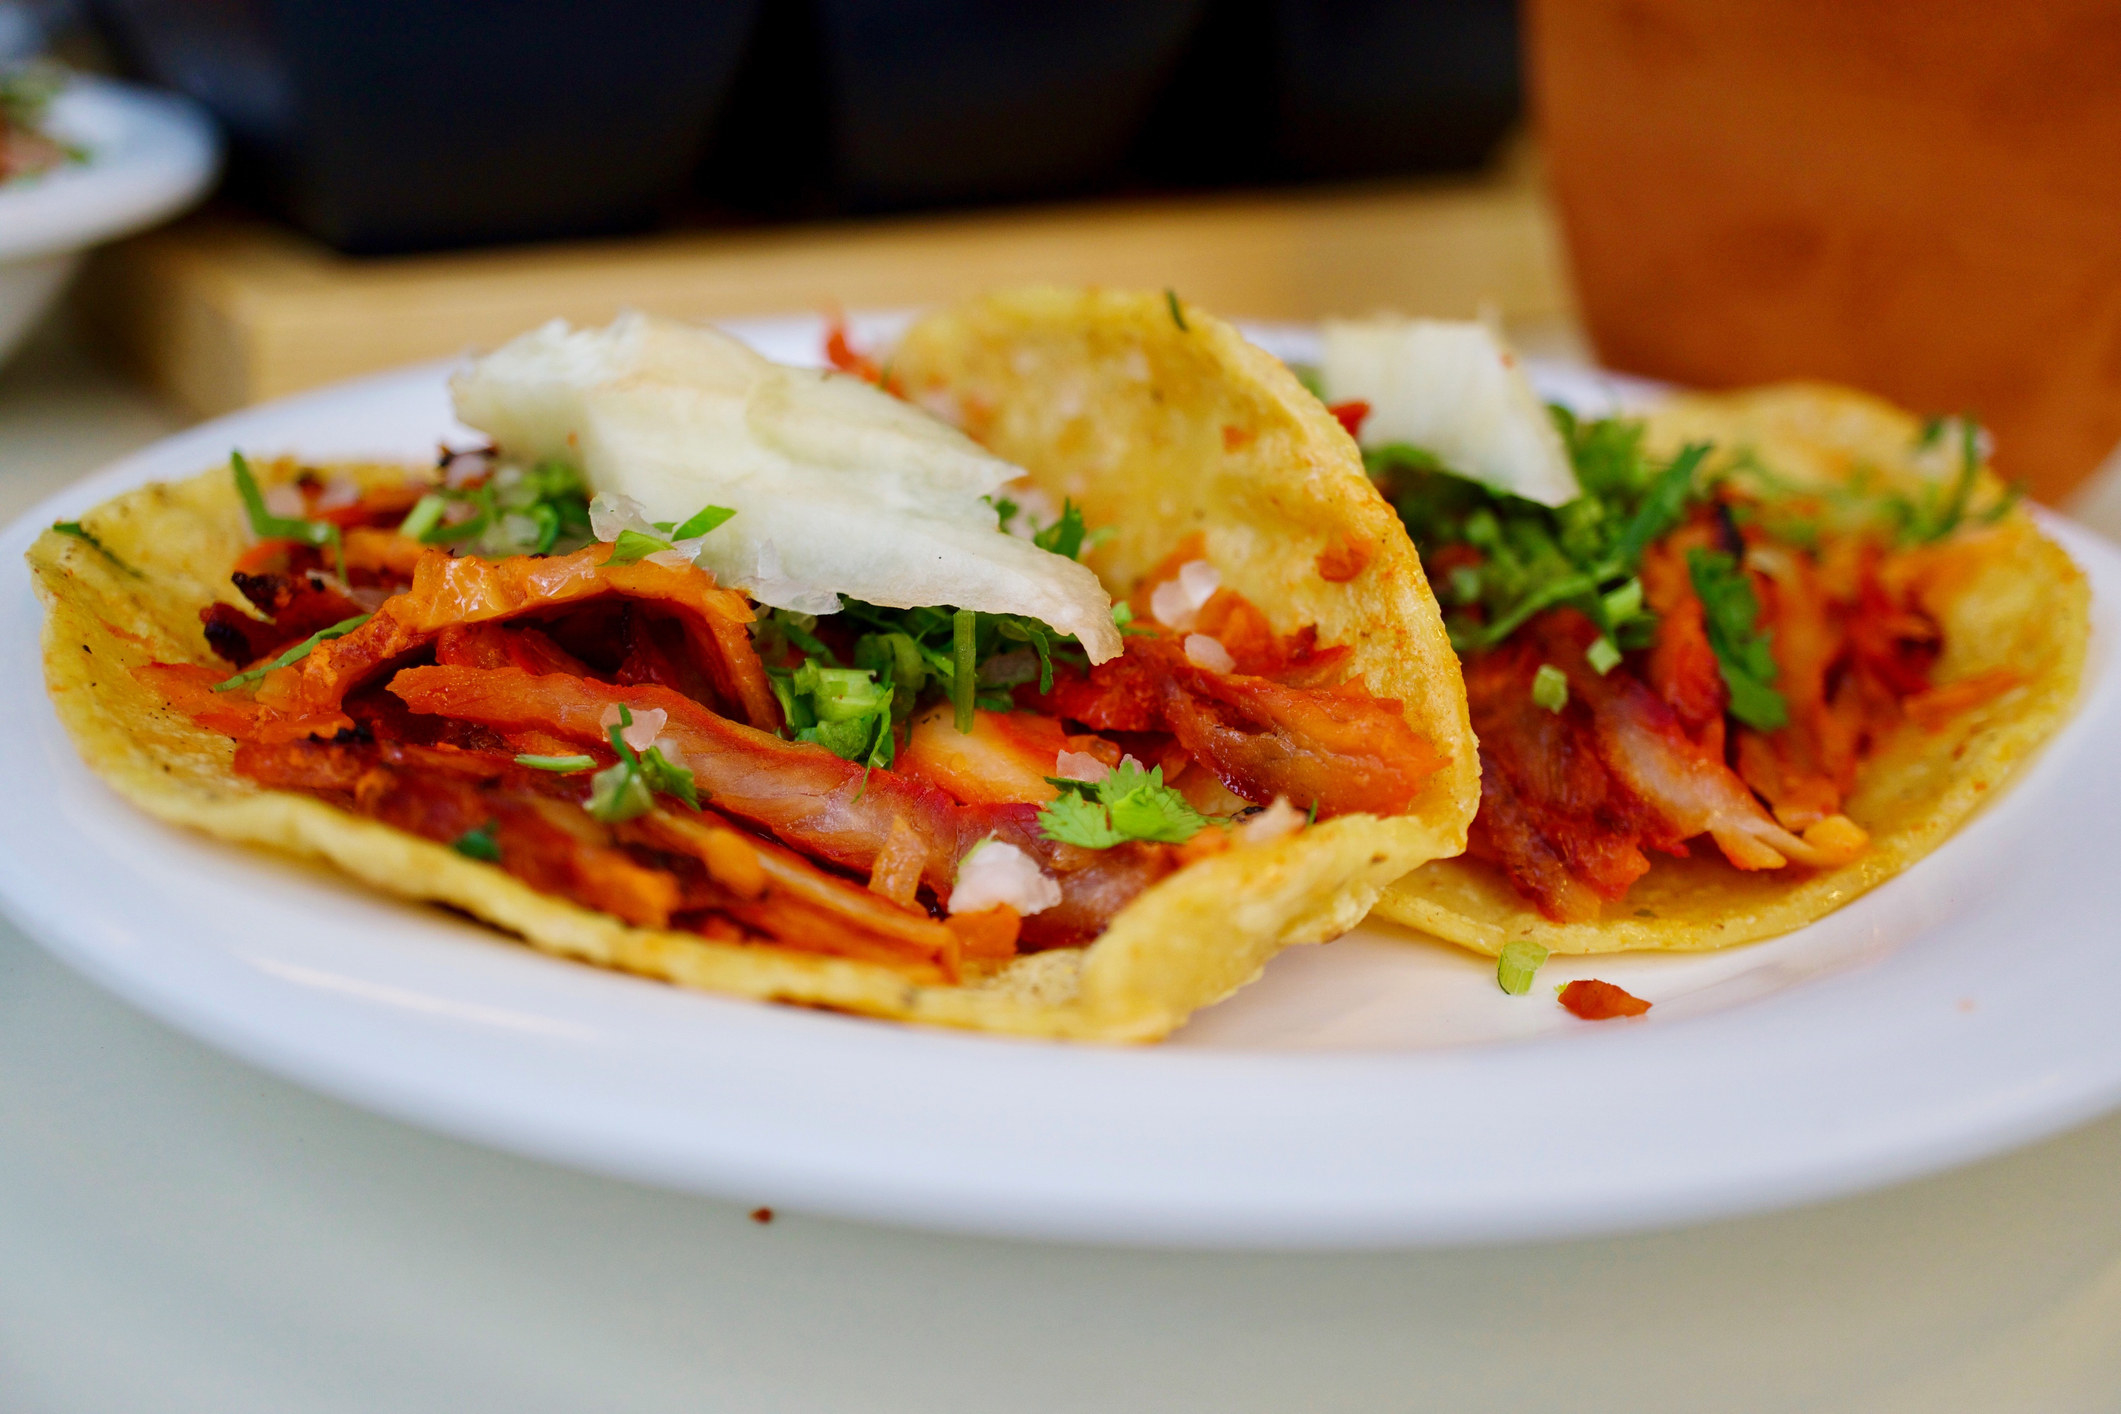 A close-up of two tacos on a plate.